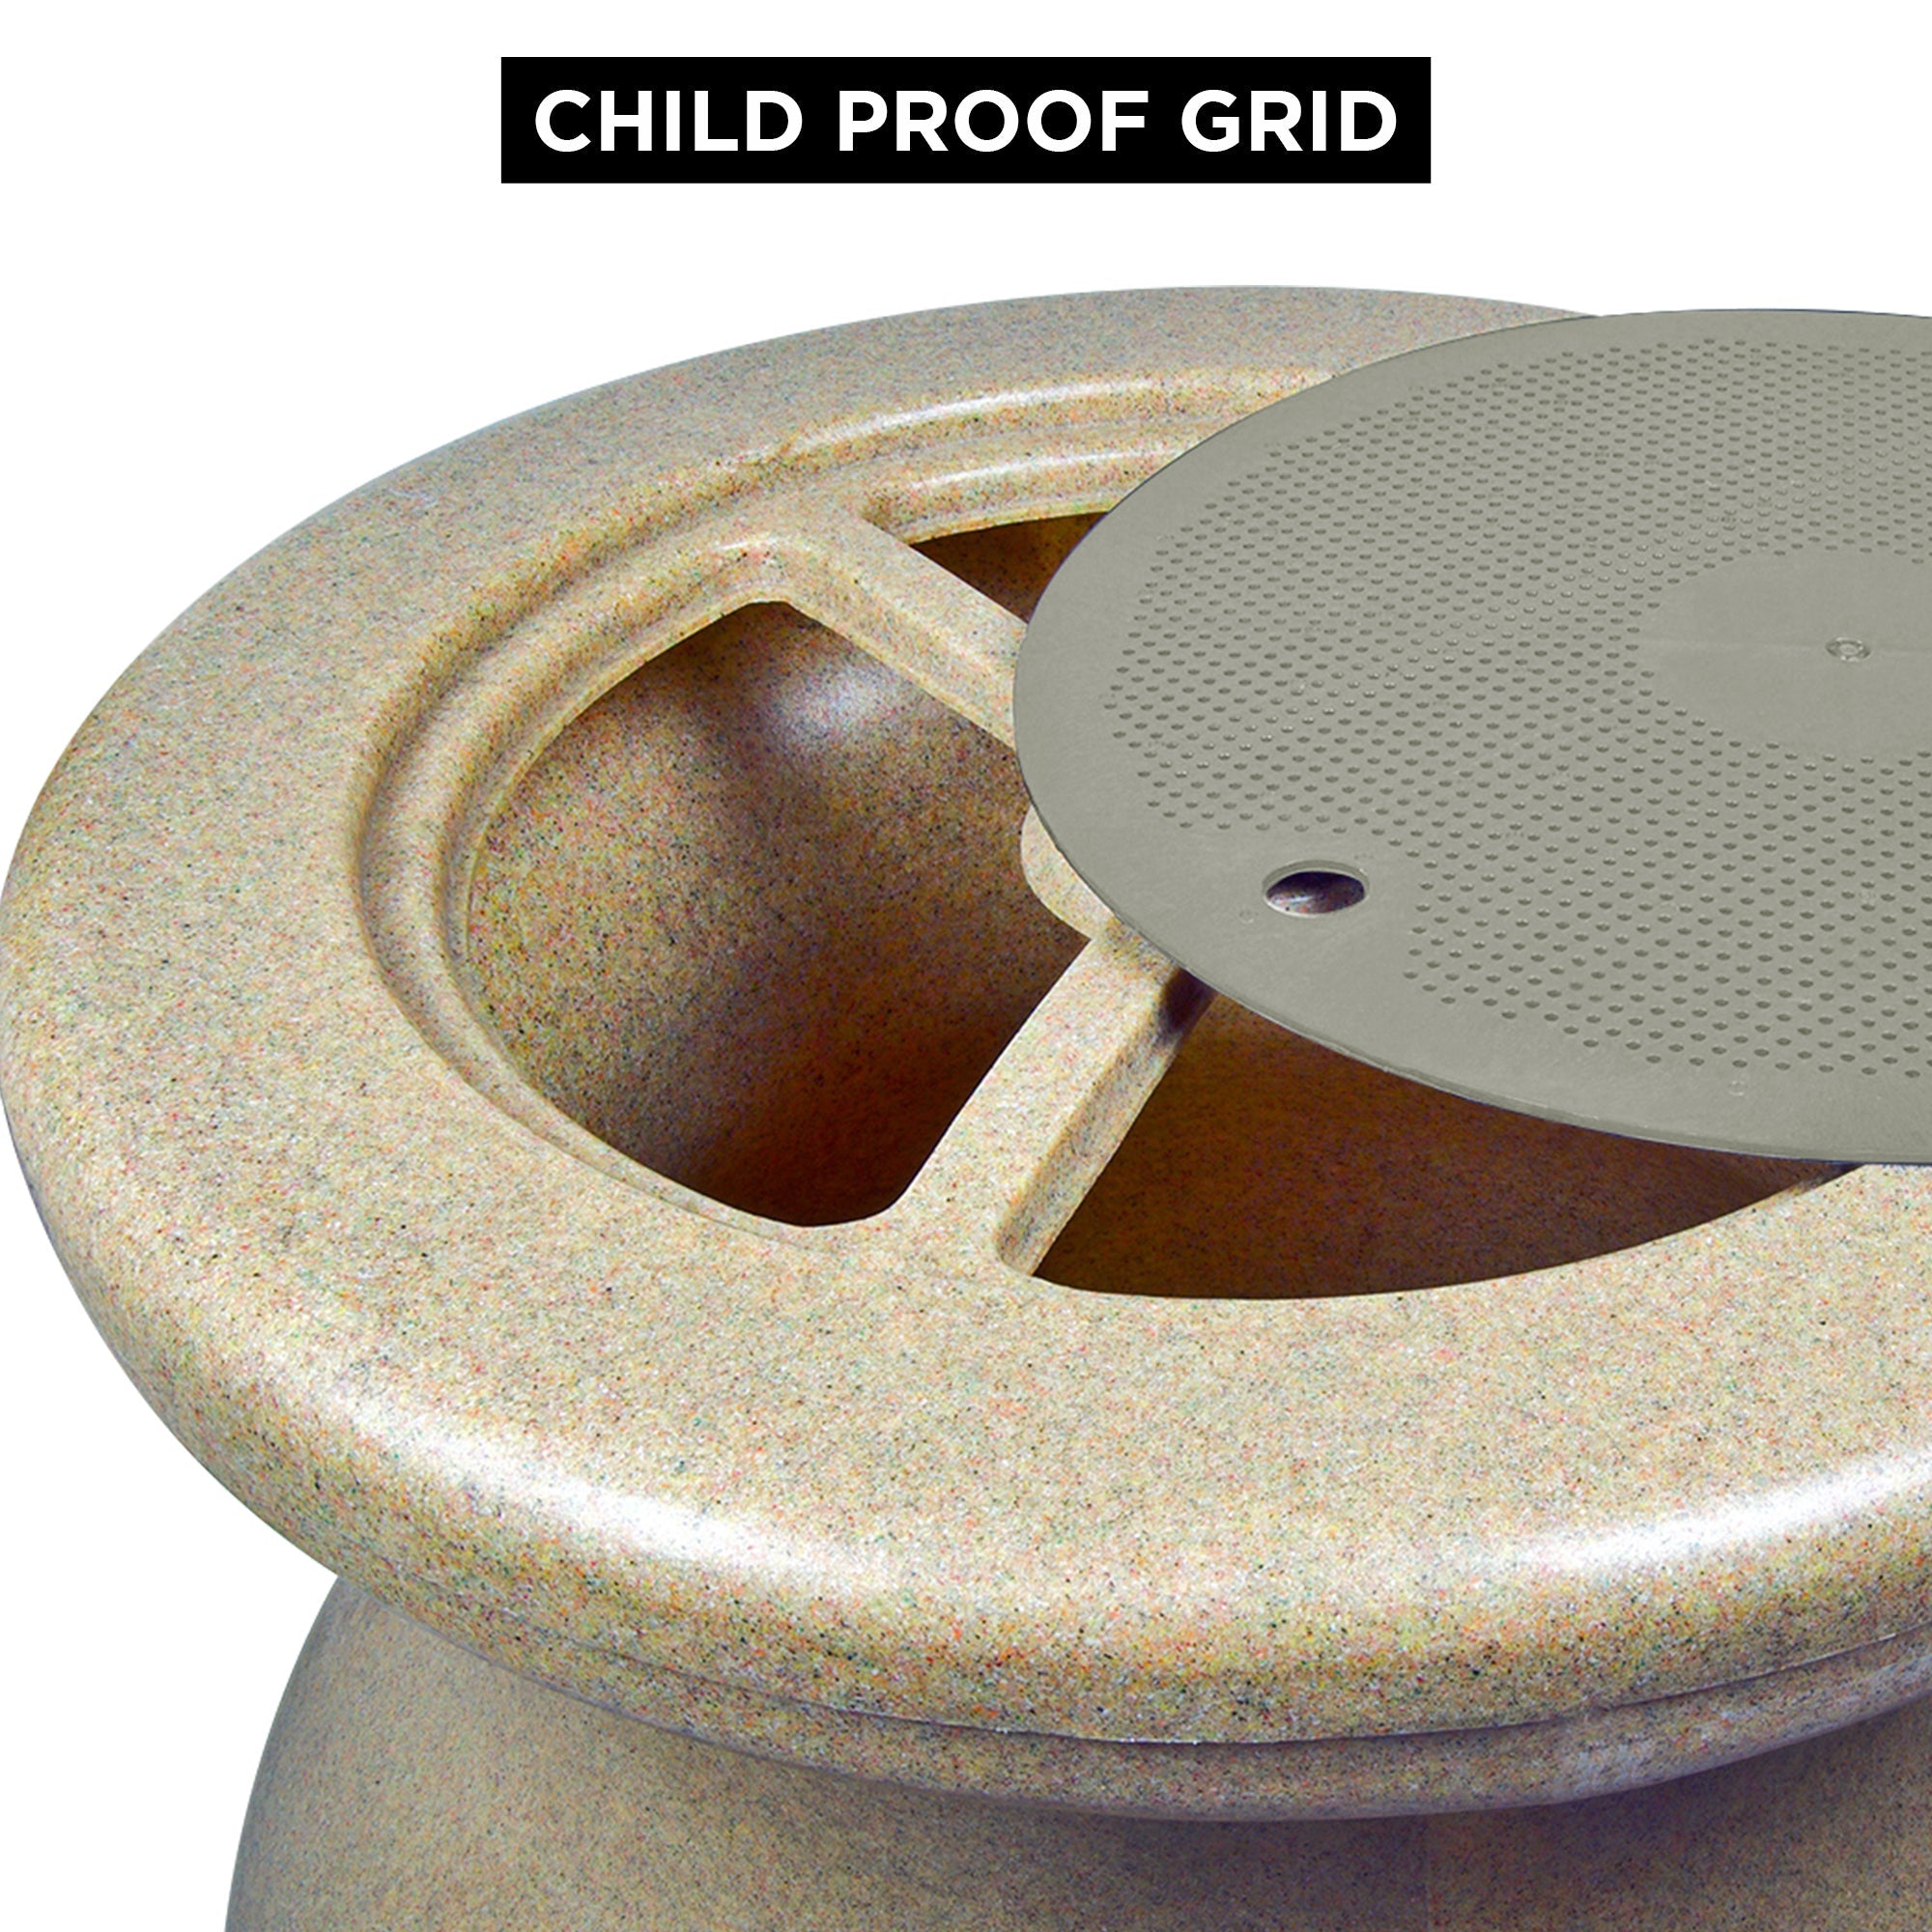 Closeup image of top of rain barrel with screen guard partly removed showing molded safety bars below. Text above reads, "Child proof grid"